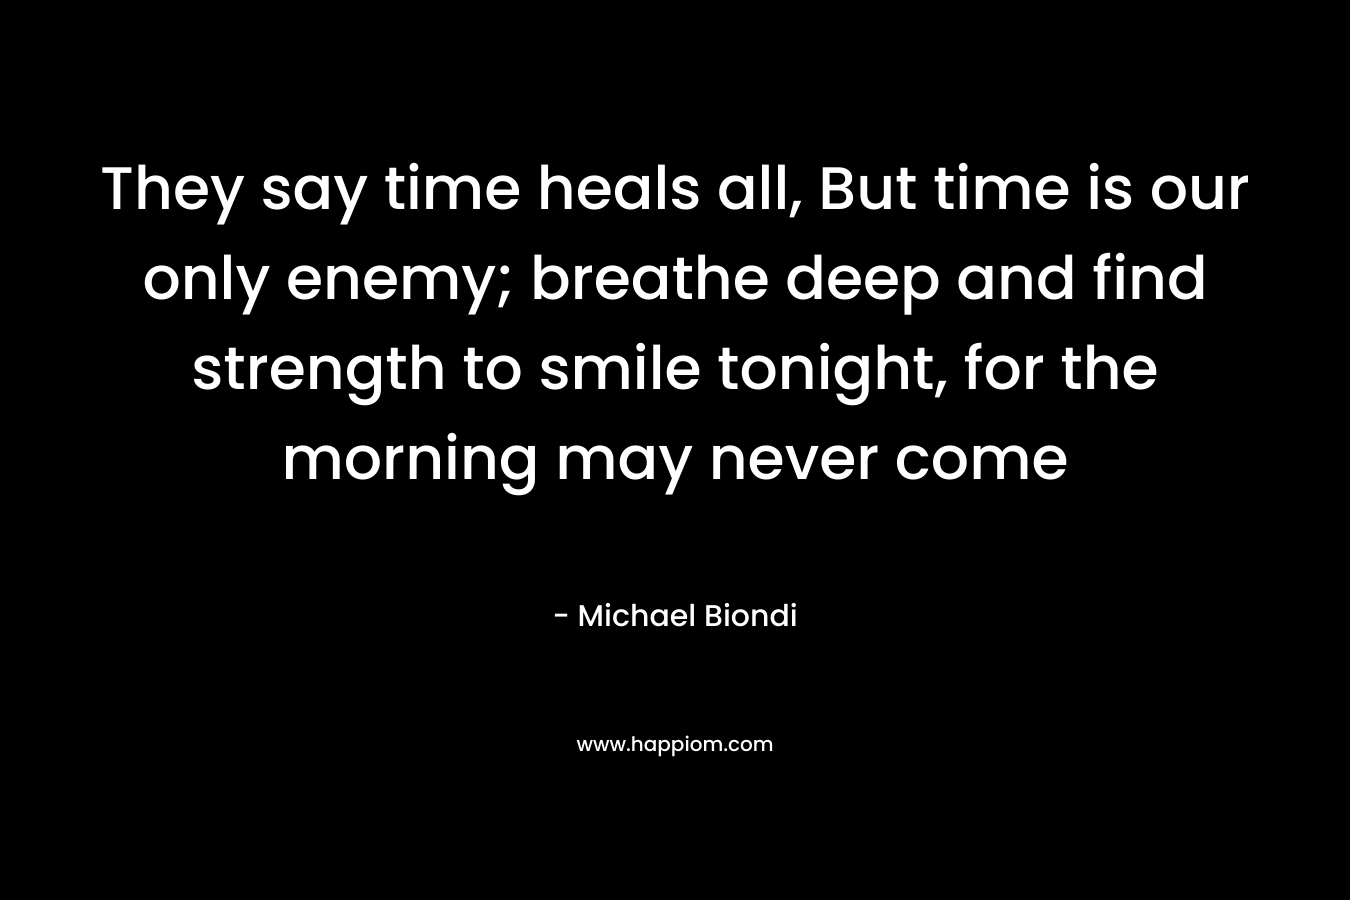 They say time heals all, But time is our only enemy; breathe deep and find strength to smile tonight, for the morning may never come – Michael Biondi